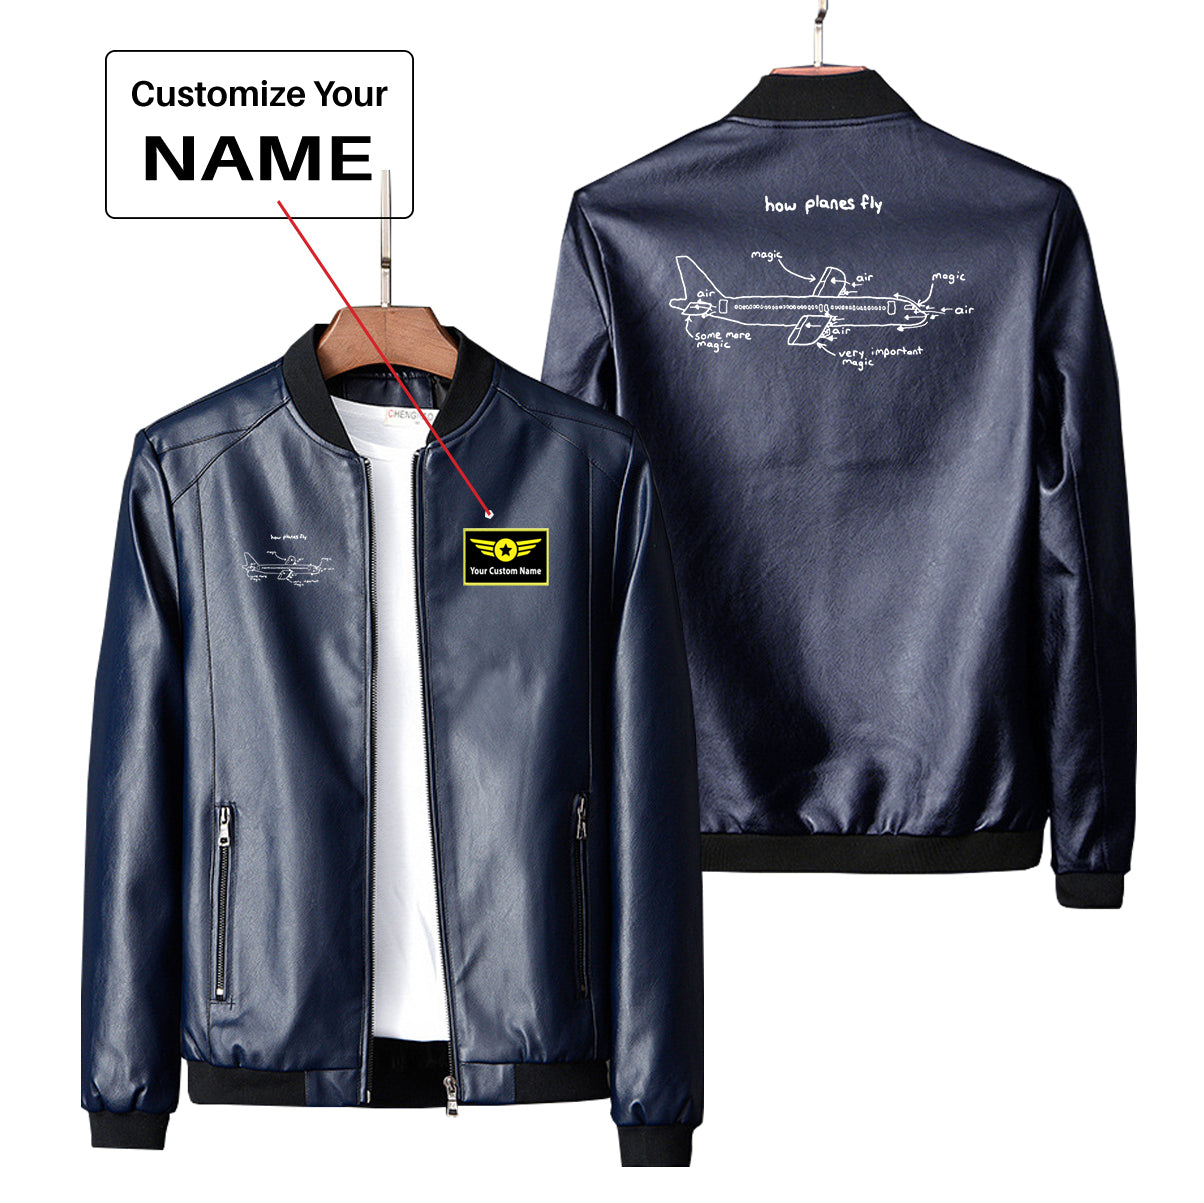 How Planes Fly Designed PU Leather Jackets